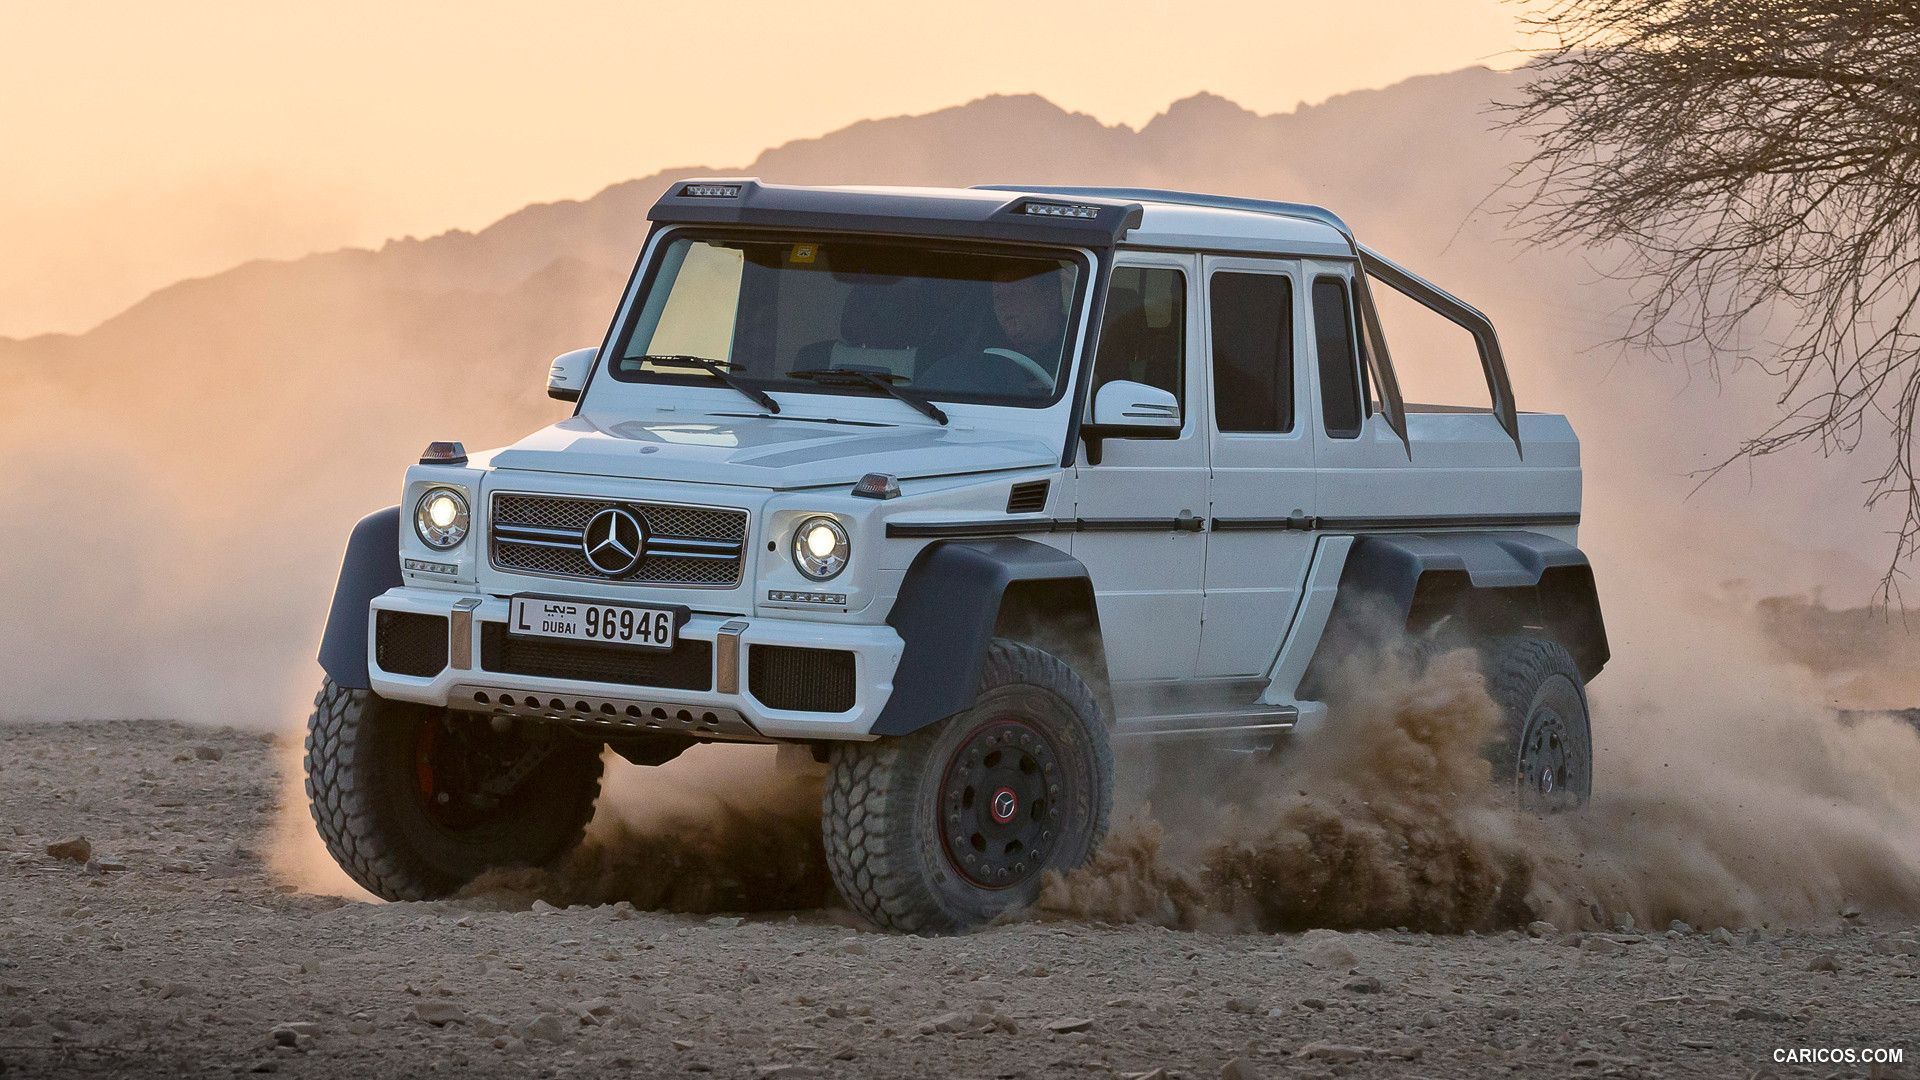 Mercedes 6x6 Wallpapers - Top Free Mercedes 6x6 Backgrounds ...